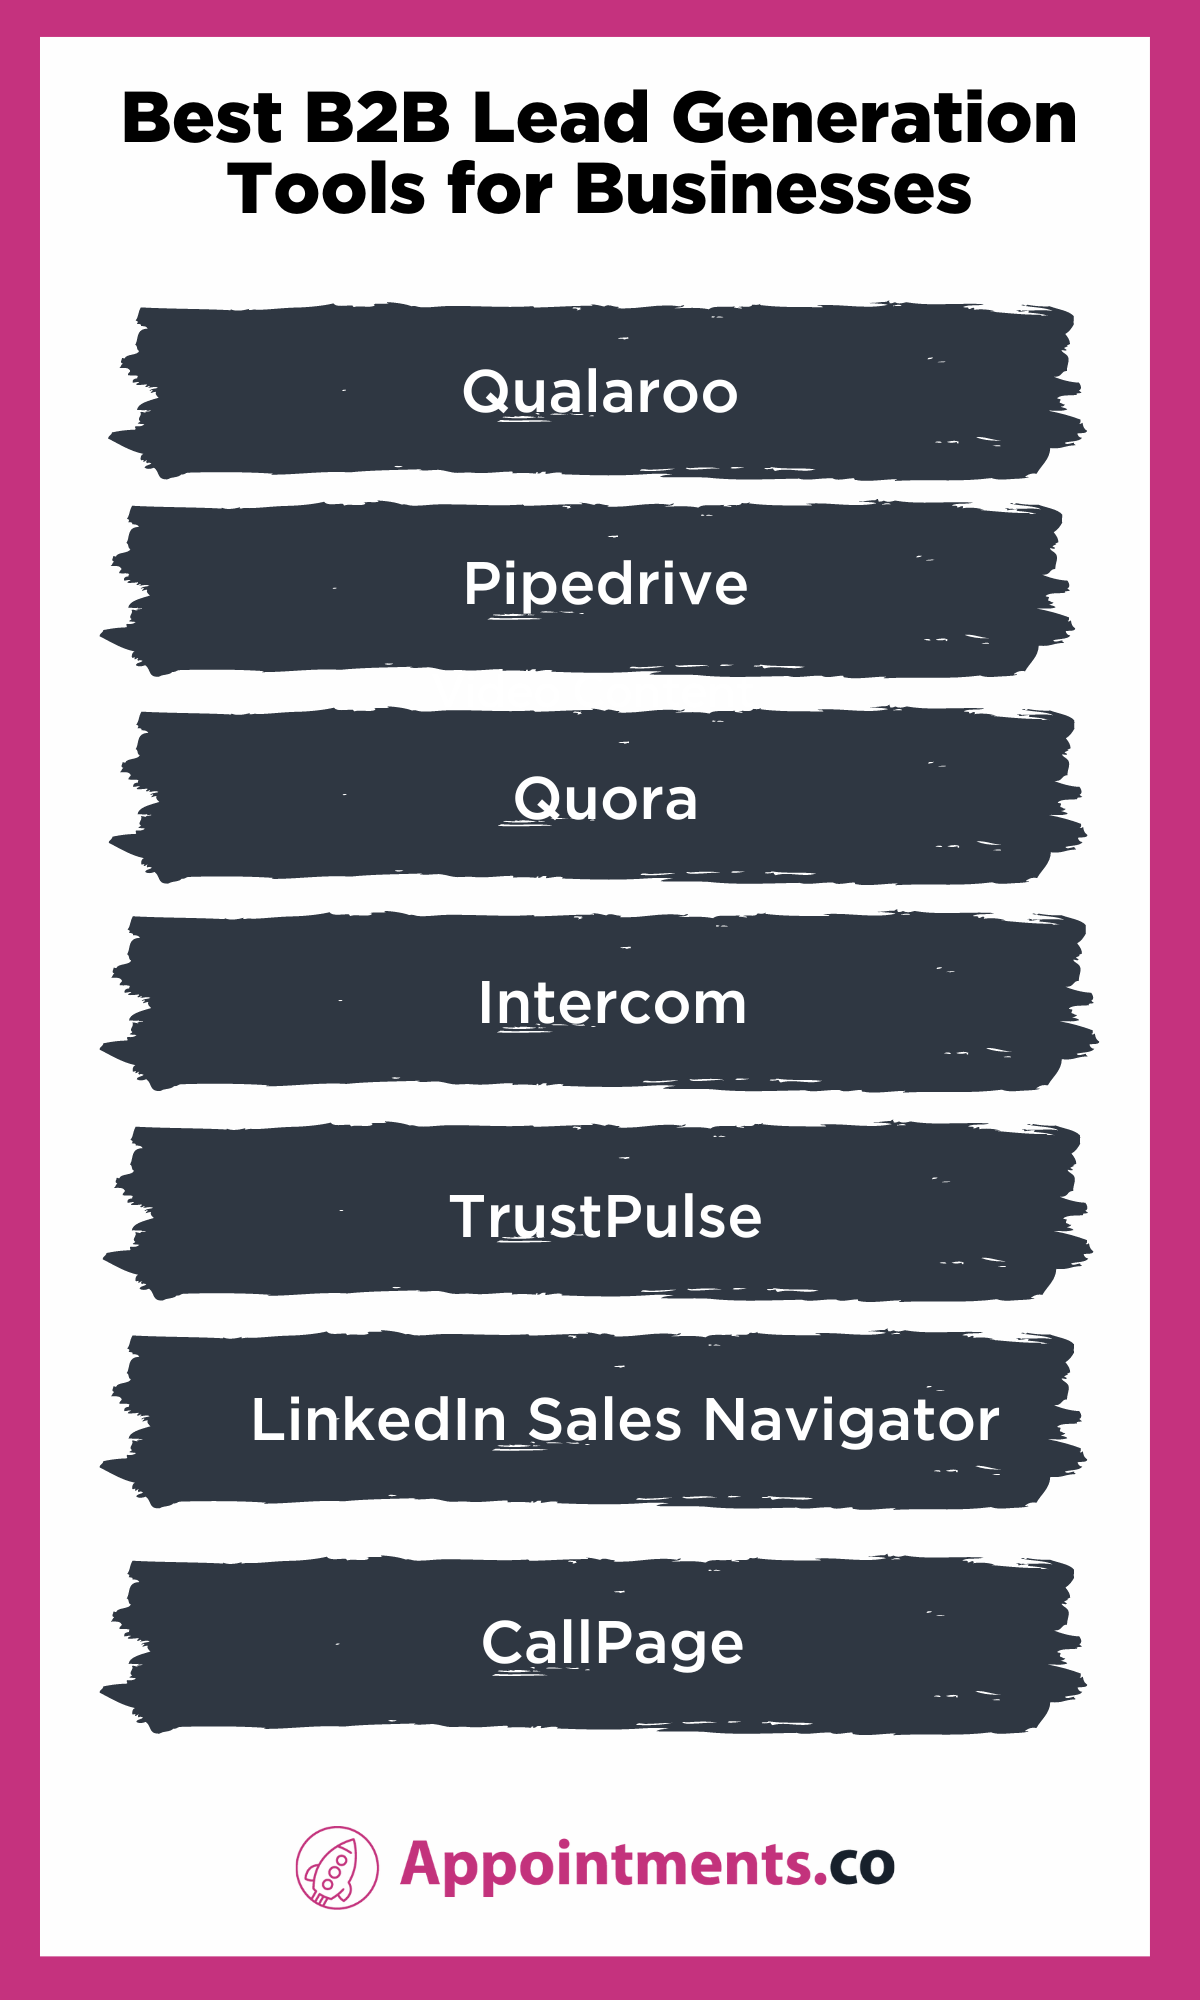 Best B2B Lead Generation Tools for Businesses - 2